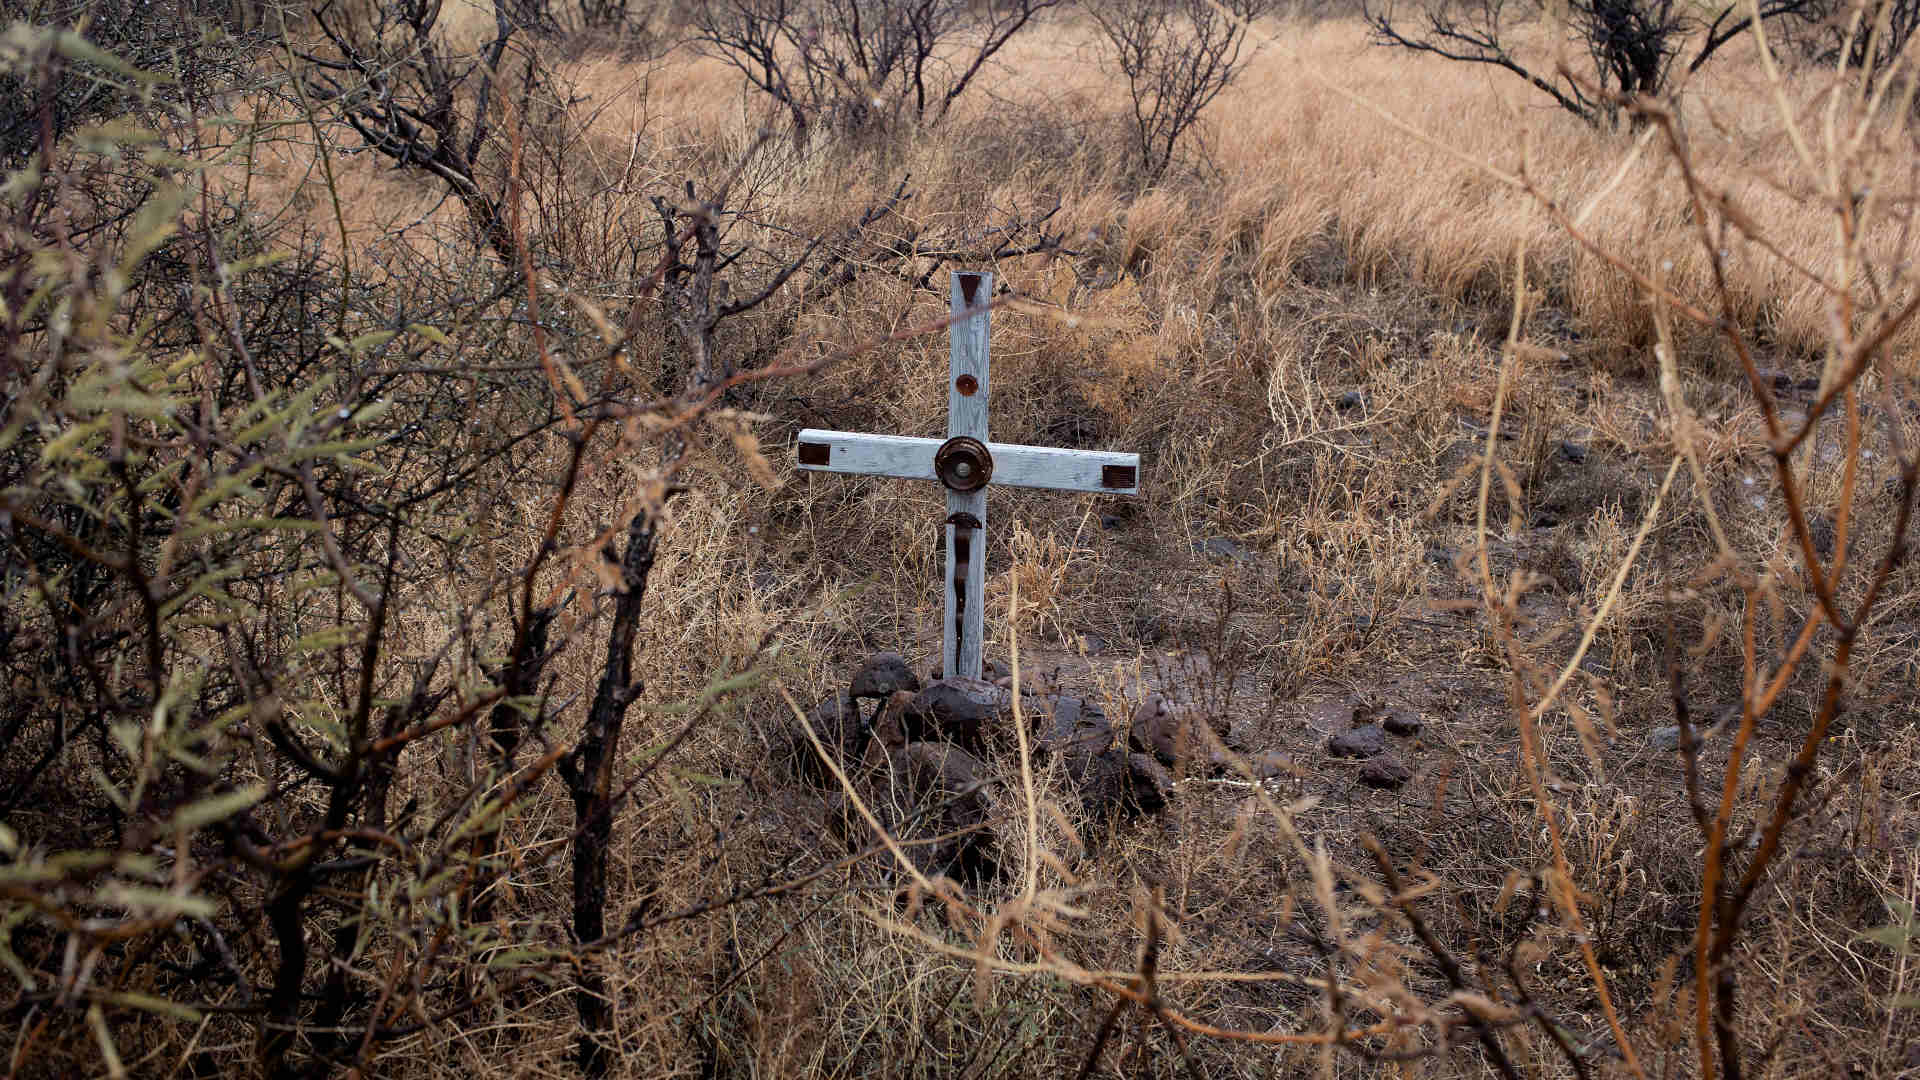 Crosses left by border activists mark the locations where the remains of migrants who died trying to cross into the United States through the harsh conditions of the Sonoran Desert were discovered in January 2021.